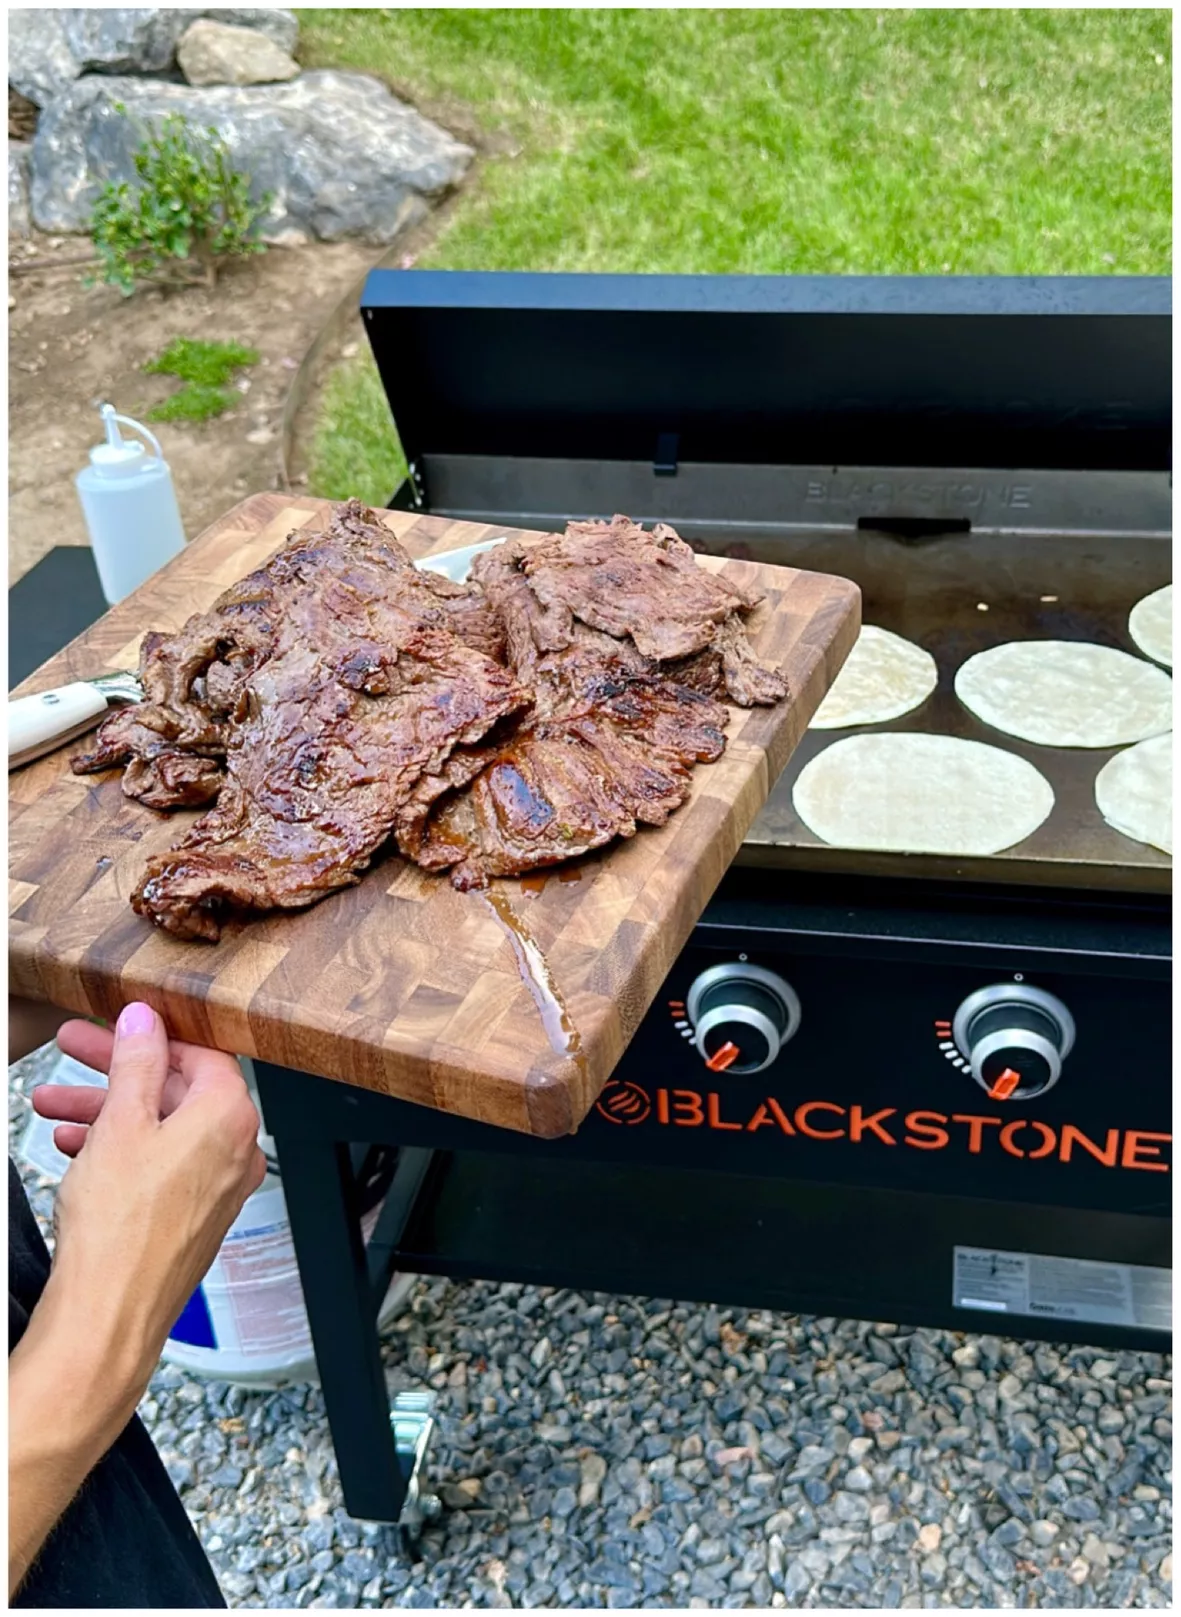 Blackstone Griddles Are a Customer Favorite on